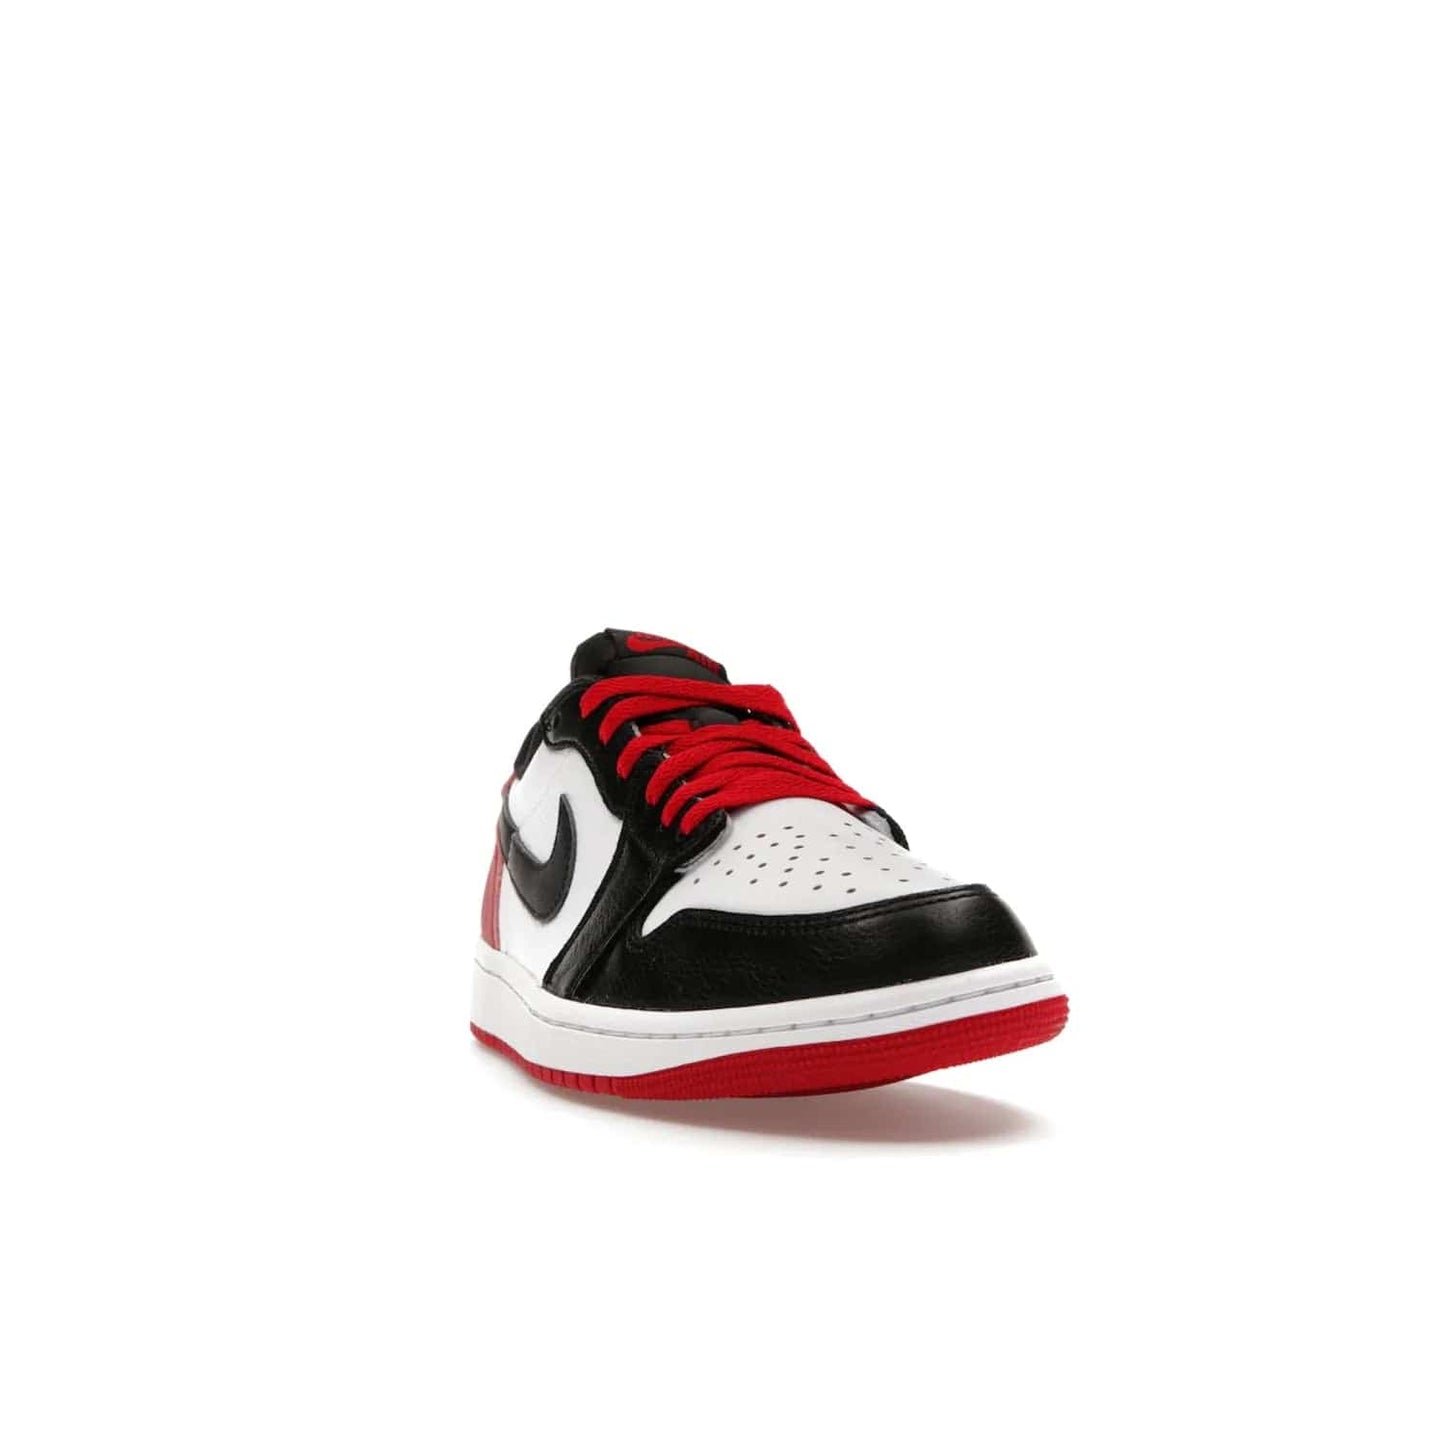 Jordan 1 Retro Low OG Black Toe (2023) - Image 8 - Only at www.BallersClubKickz.com - Upgrade your wardrobe with the Jordan 1 Retro Low OG Black Toe featuring a classic black and white upper and dynamic red heel counter. Eye-catching white midsole and iconic black Swoosh and Wings complete the timeless yet modern look. Shop now to own this iconic shoe!